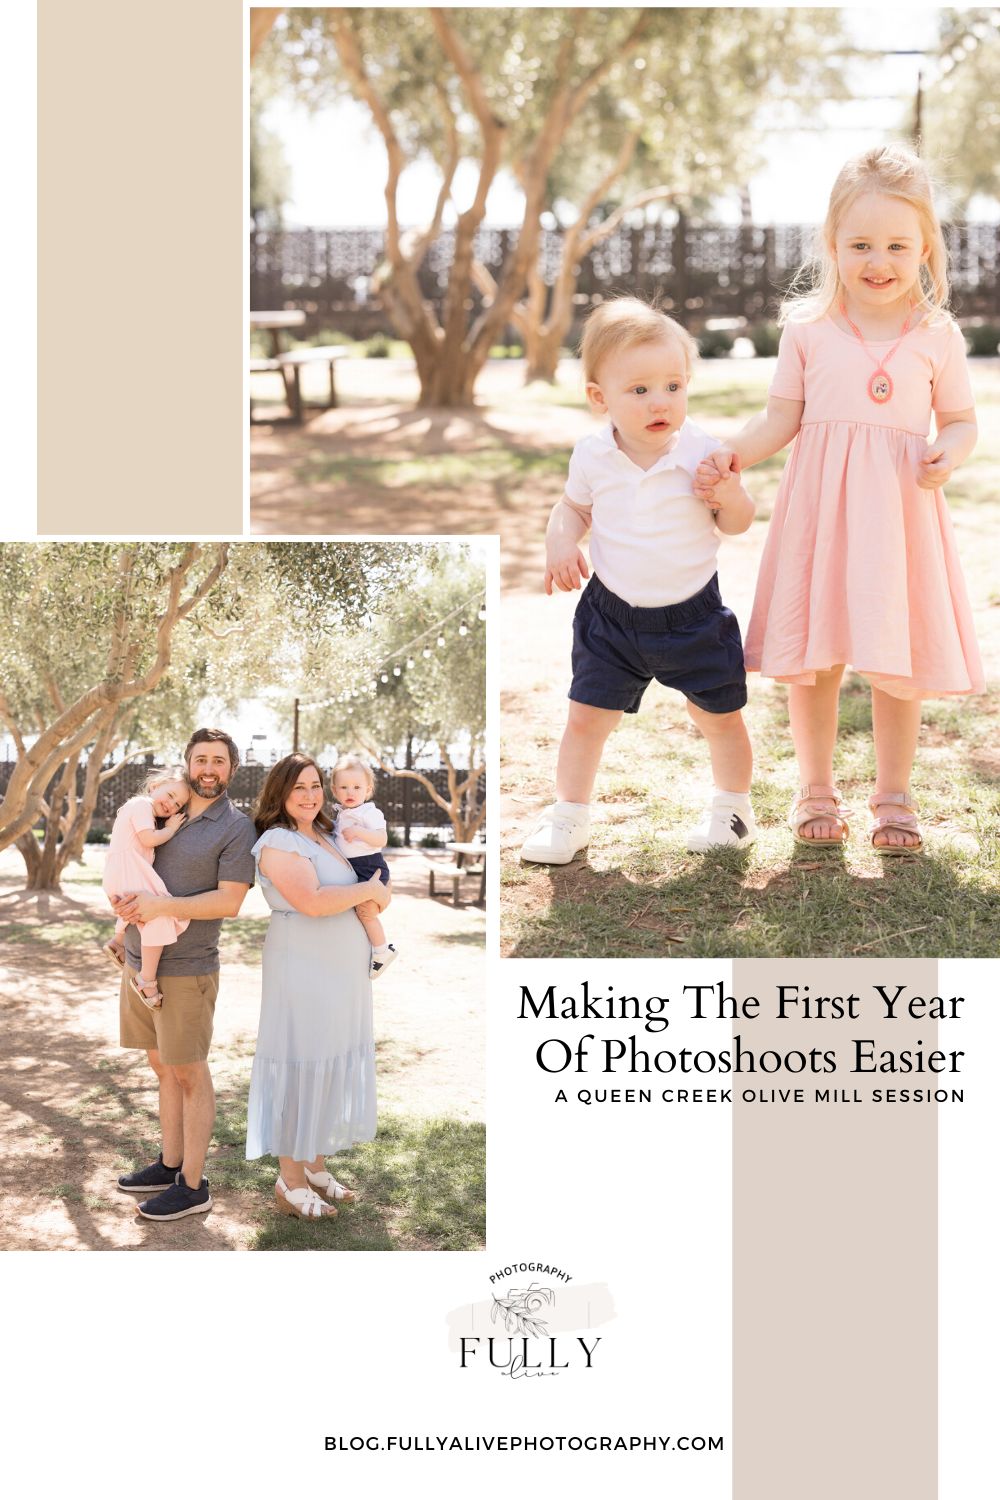 Making The First Year Of Photoshoots Easier A Queen Creek Olive Mill Session